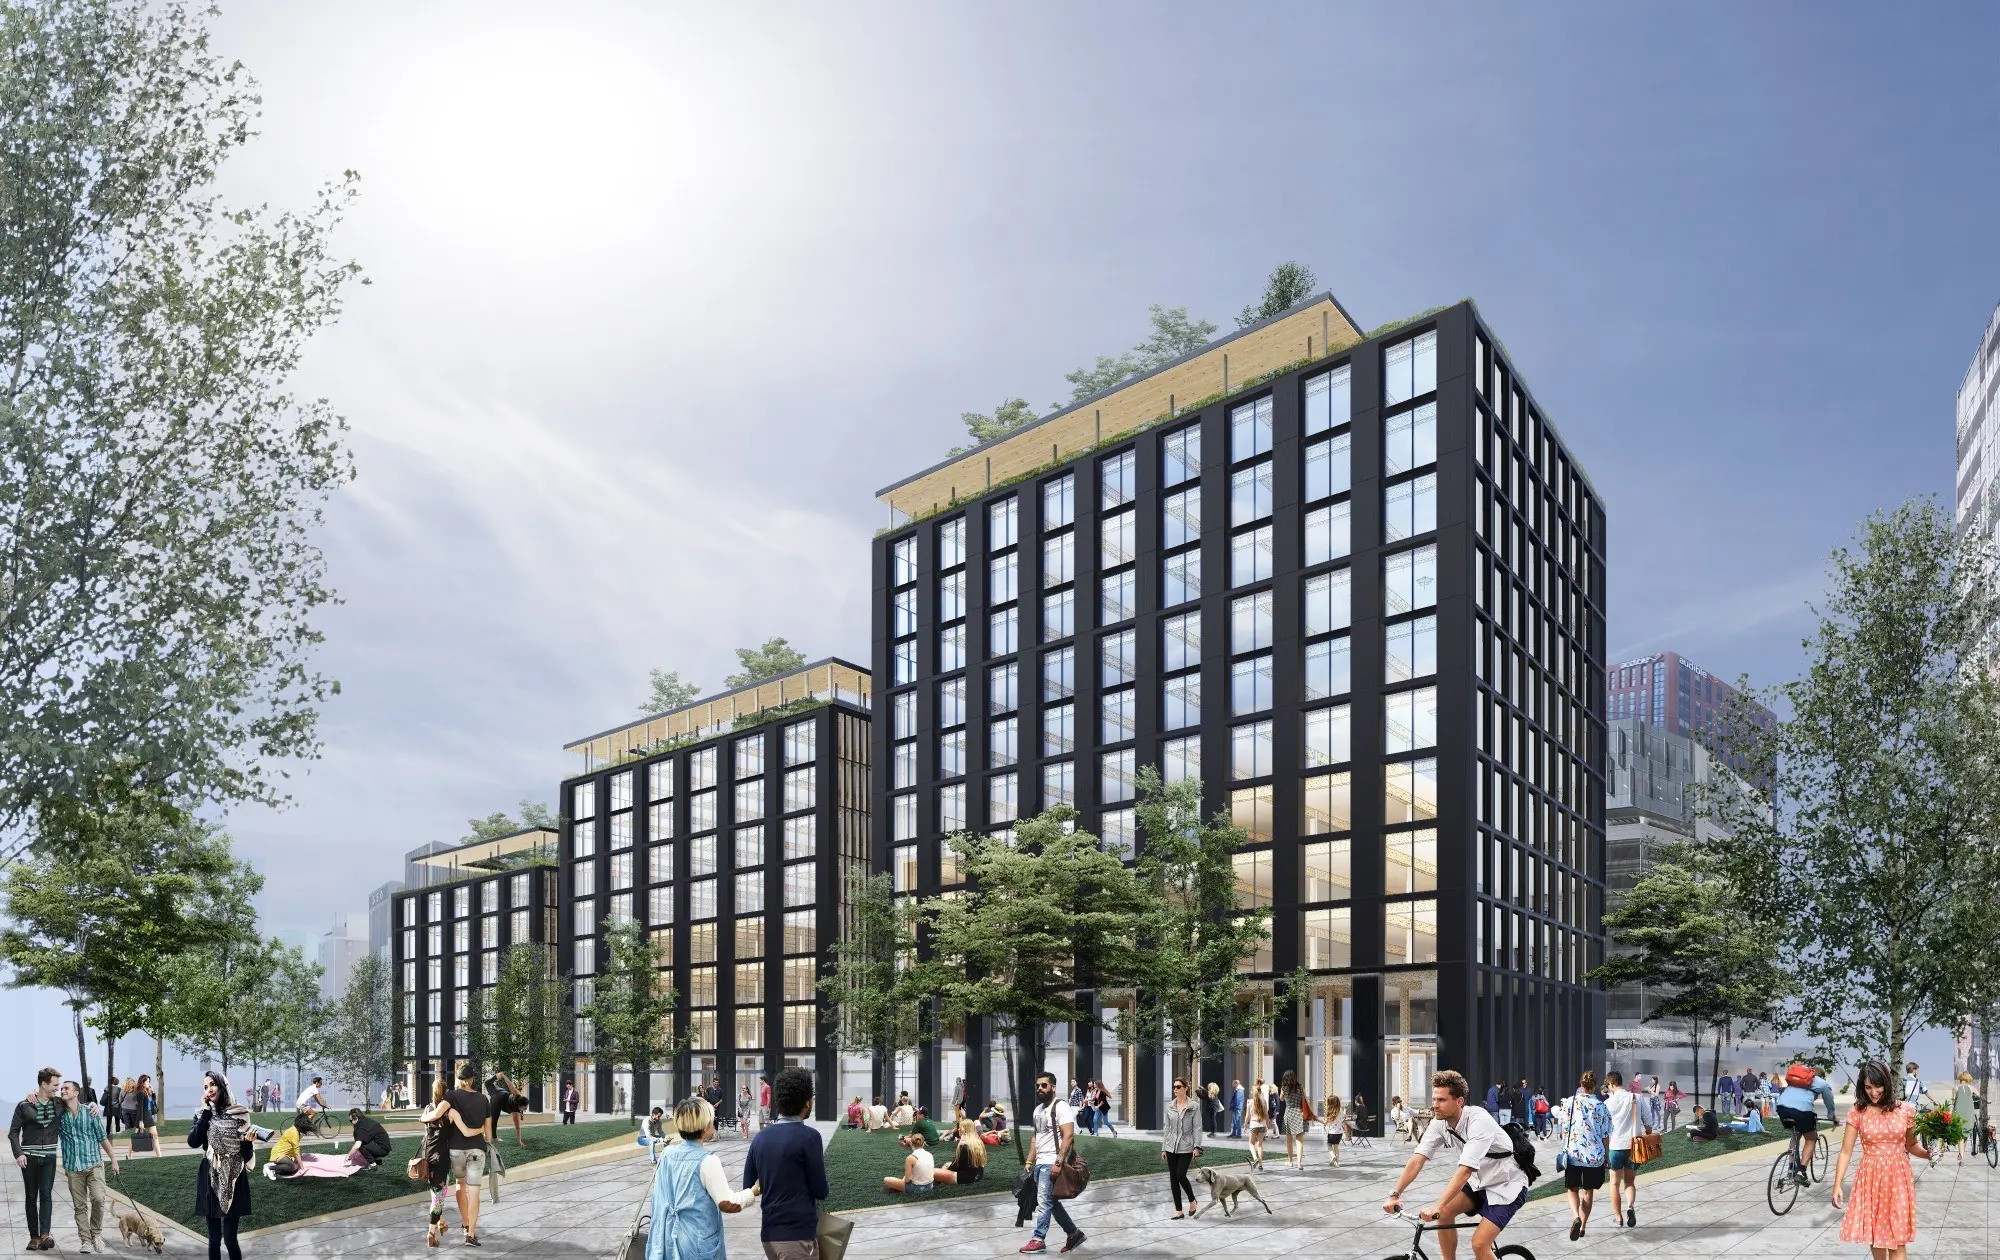 Largest timber-constructed office building in the nation planned for  Newark's waterfront